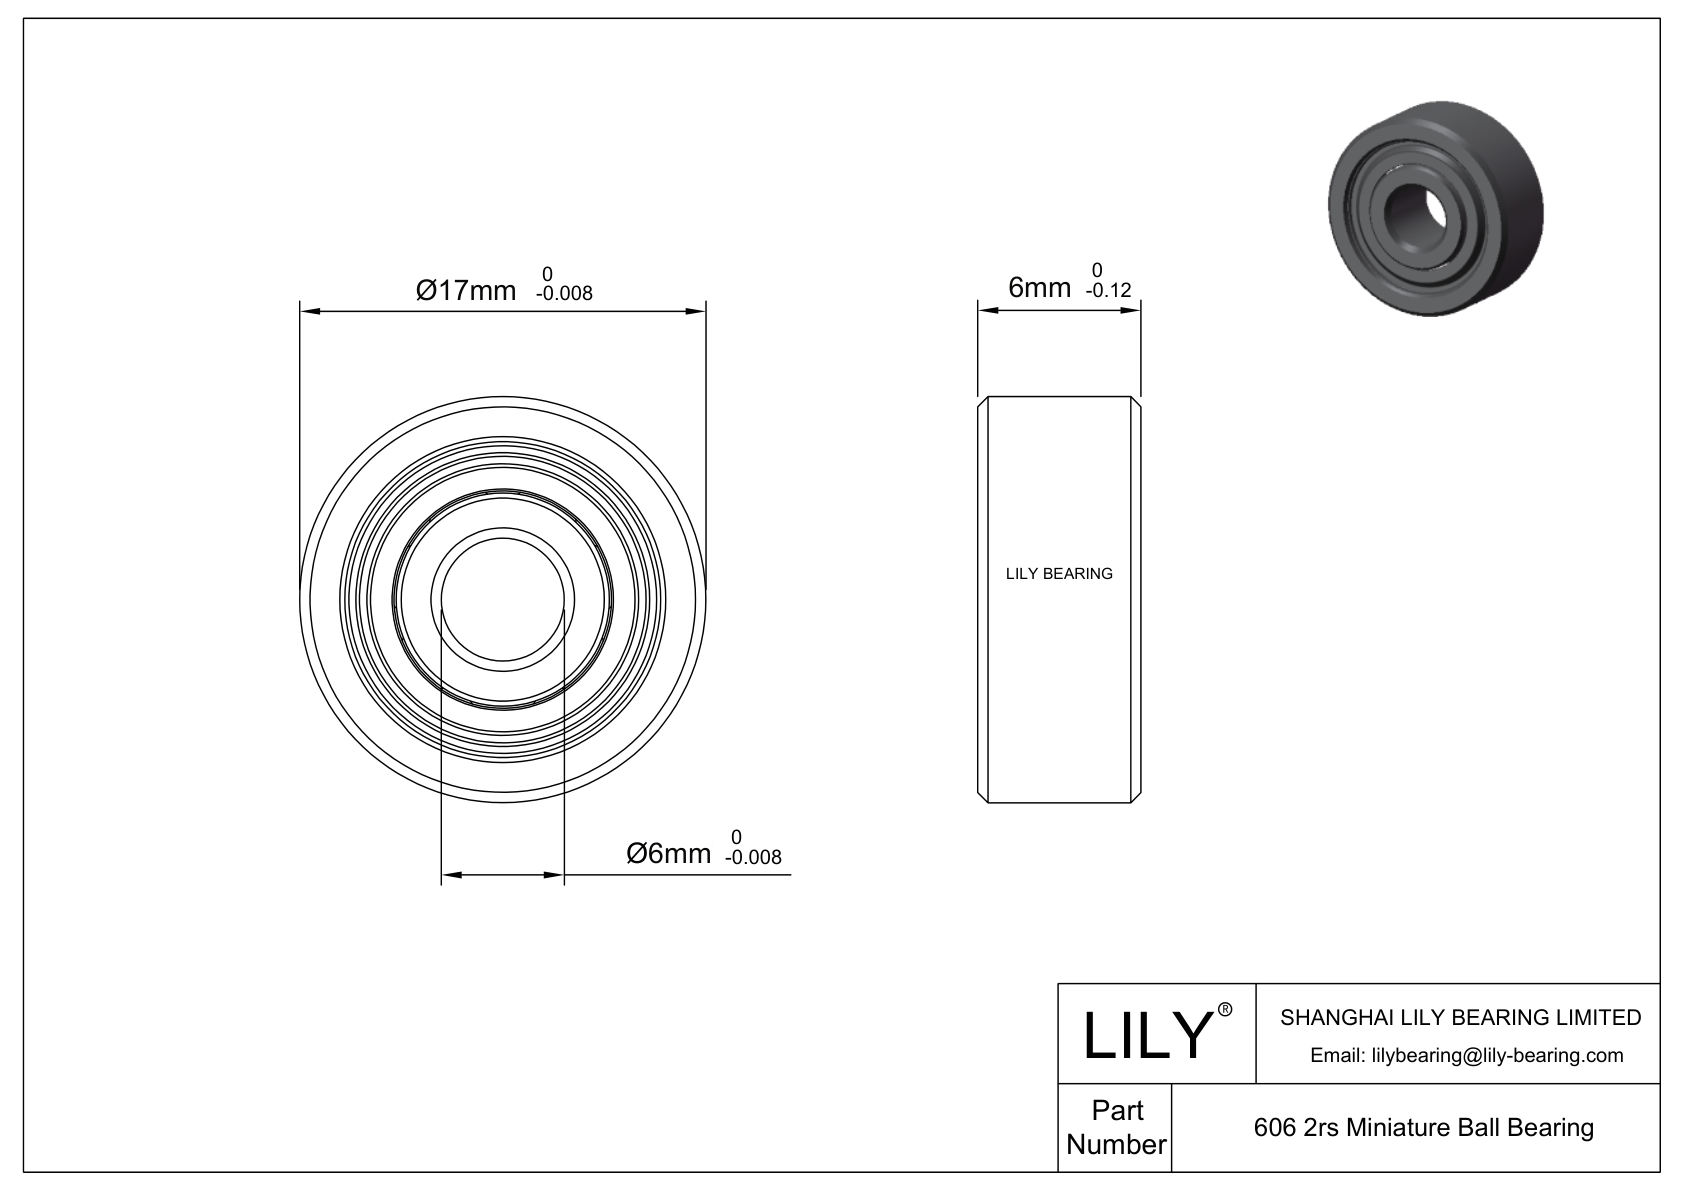 LILY-BS60621-9 POM Coated Bearing cad drawing